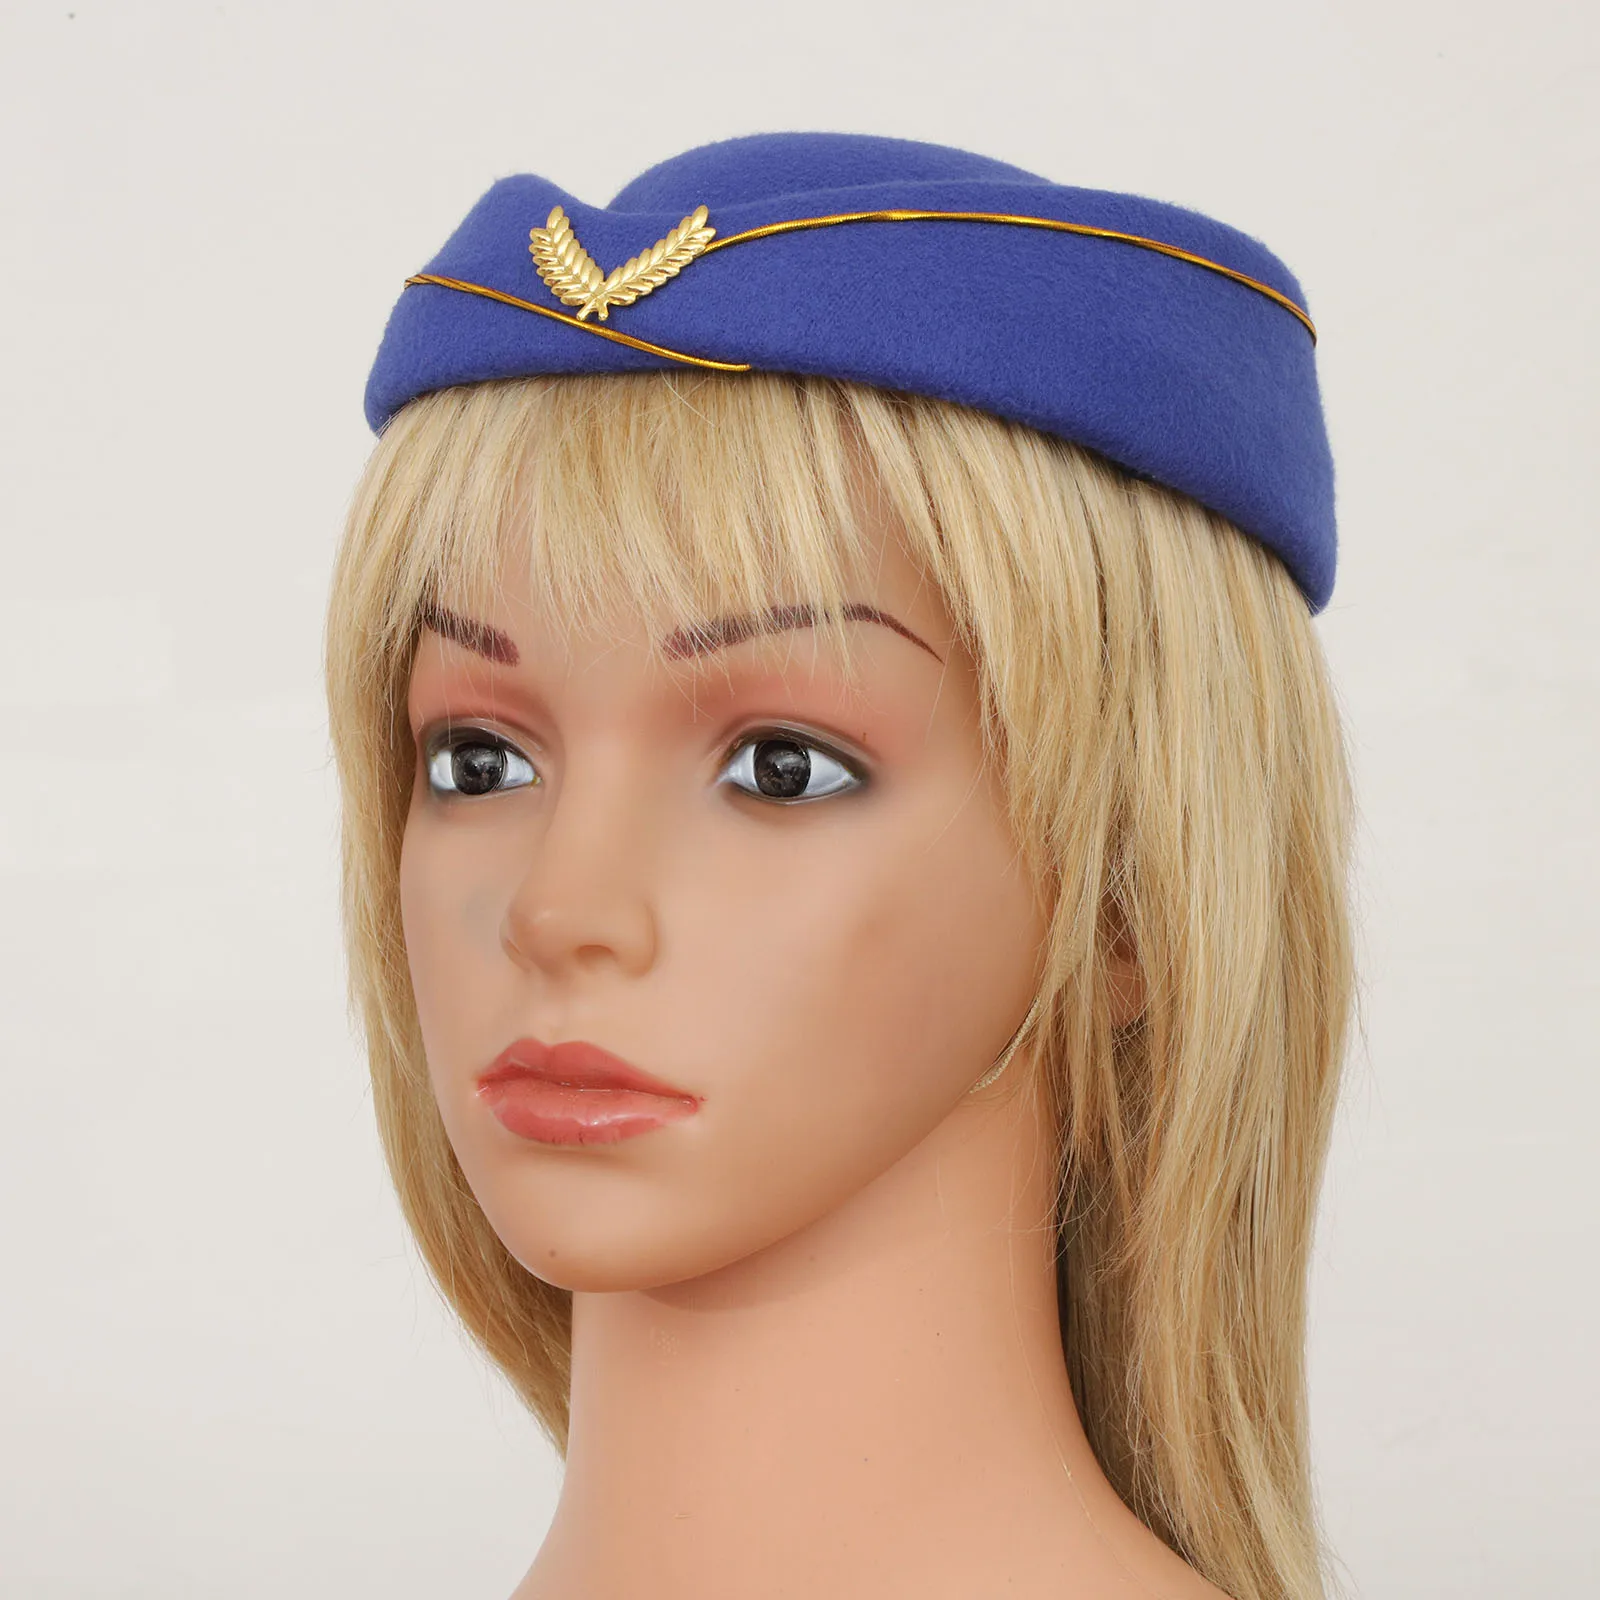 Halloween Beret Air Stewardess Cap Gold Spikes Decorations Bowler Hat for Orchestra Honor Guard Receptionist Cosplay Party